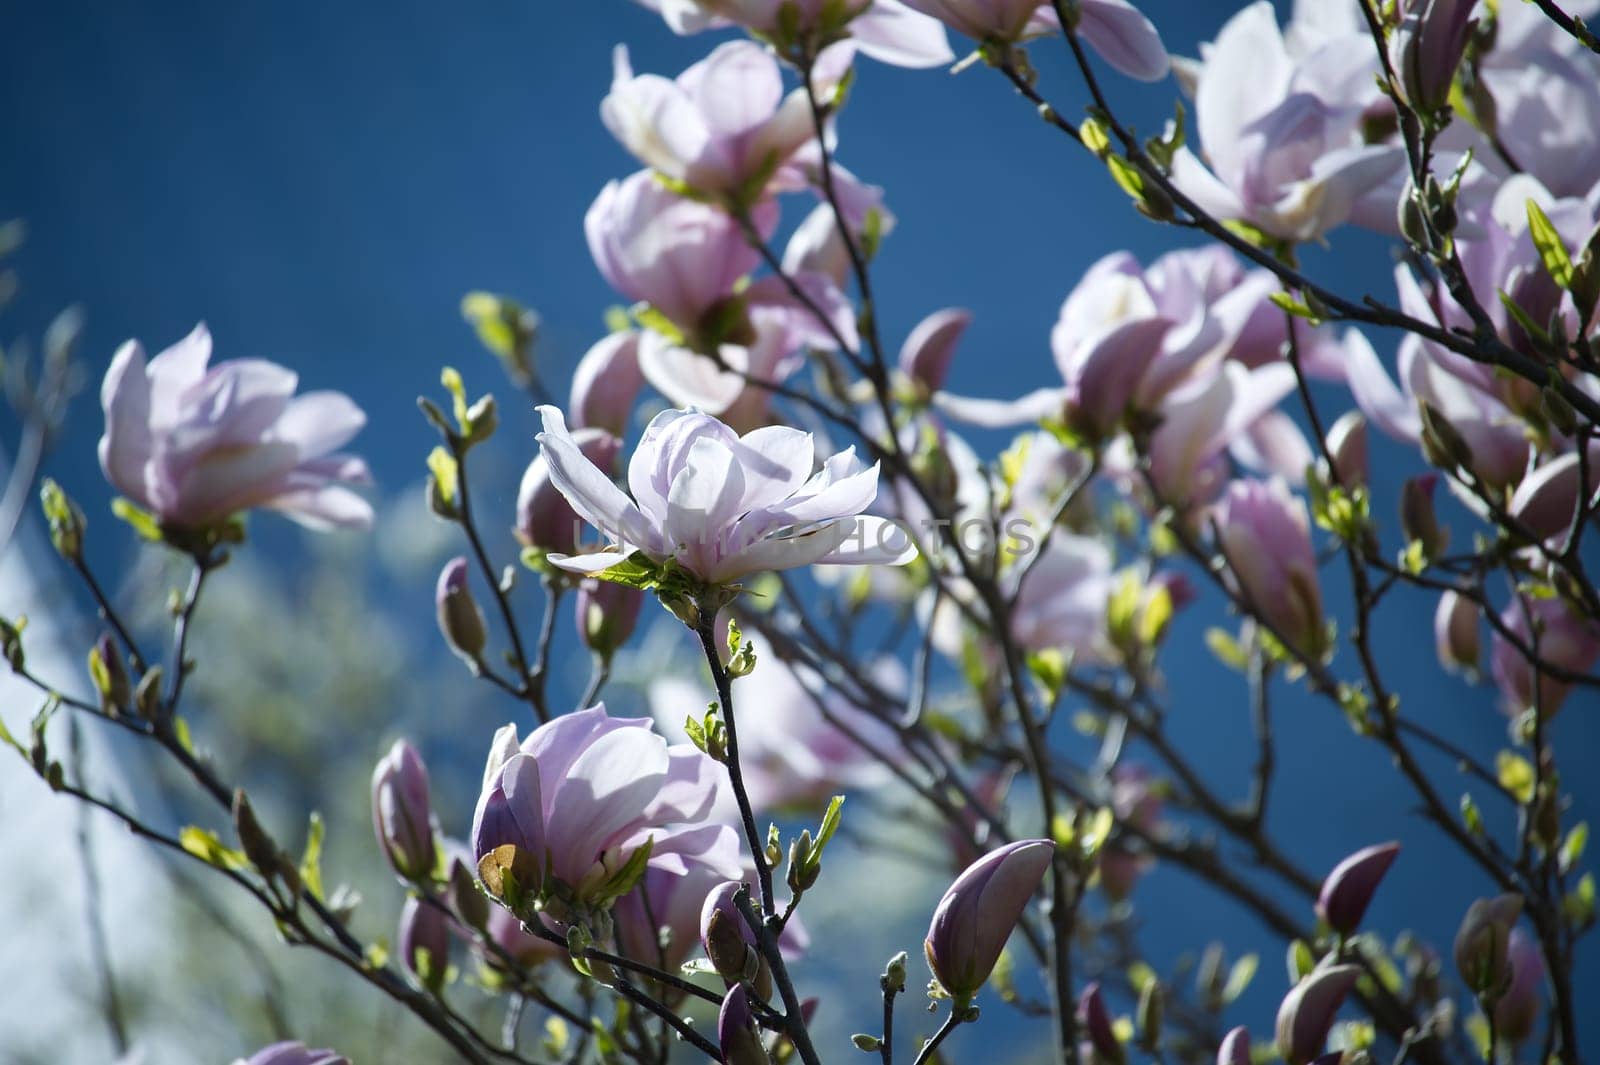 Vivid scene of a magnolia tree in bloom against a deep blue sky, vibrant green leaves of the tree offer a contrasting backdrop to the delicate colors of the magnolias